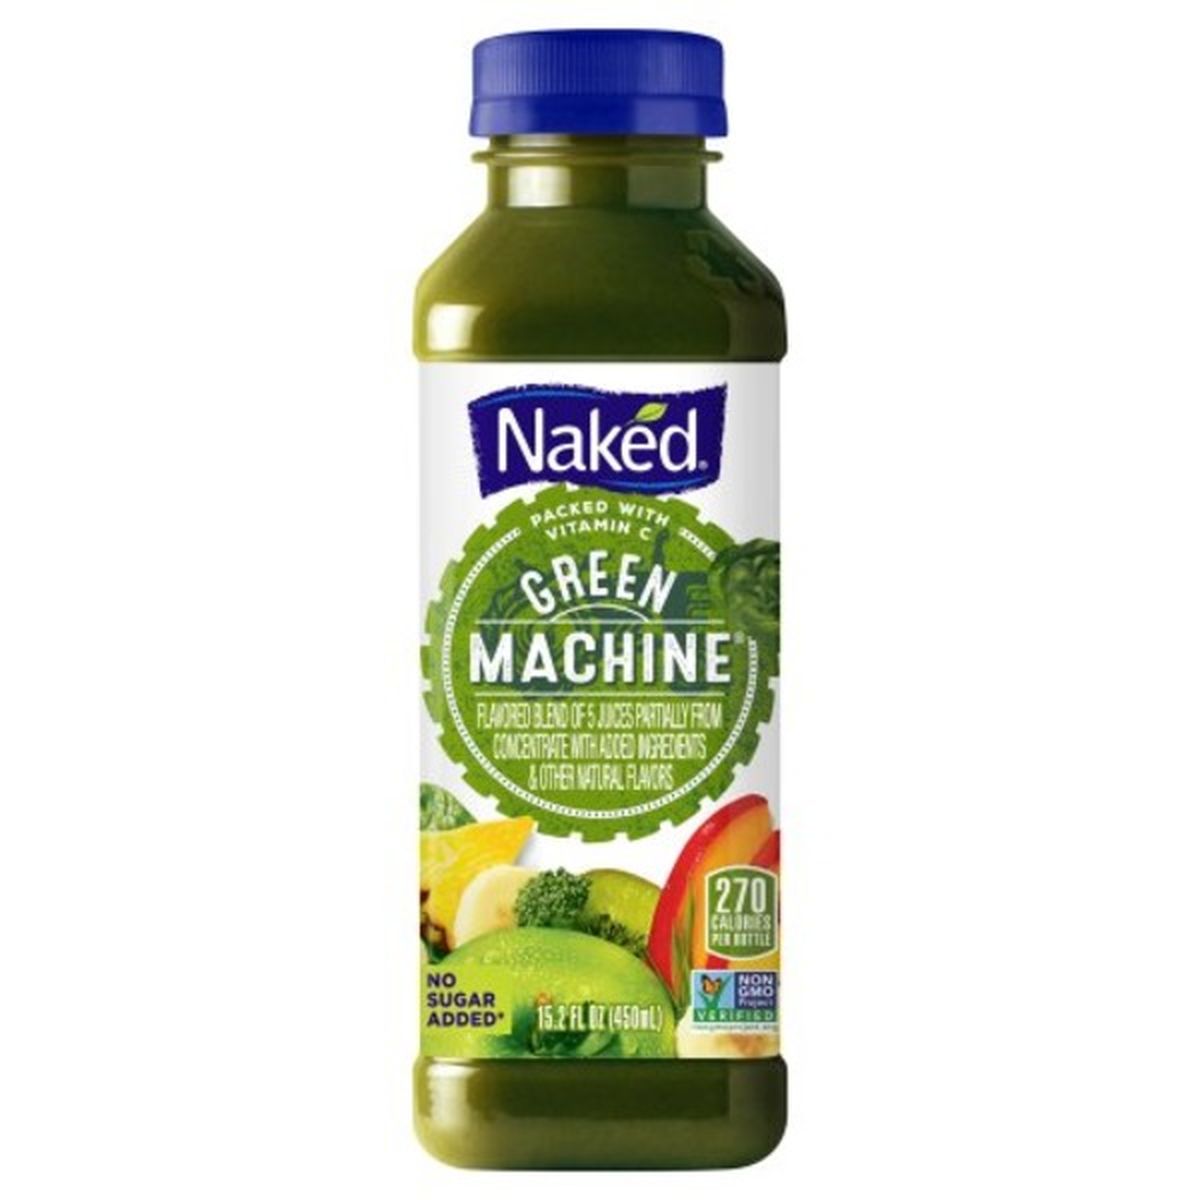 Calories in Naked Machine Chilled  Juice, Green